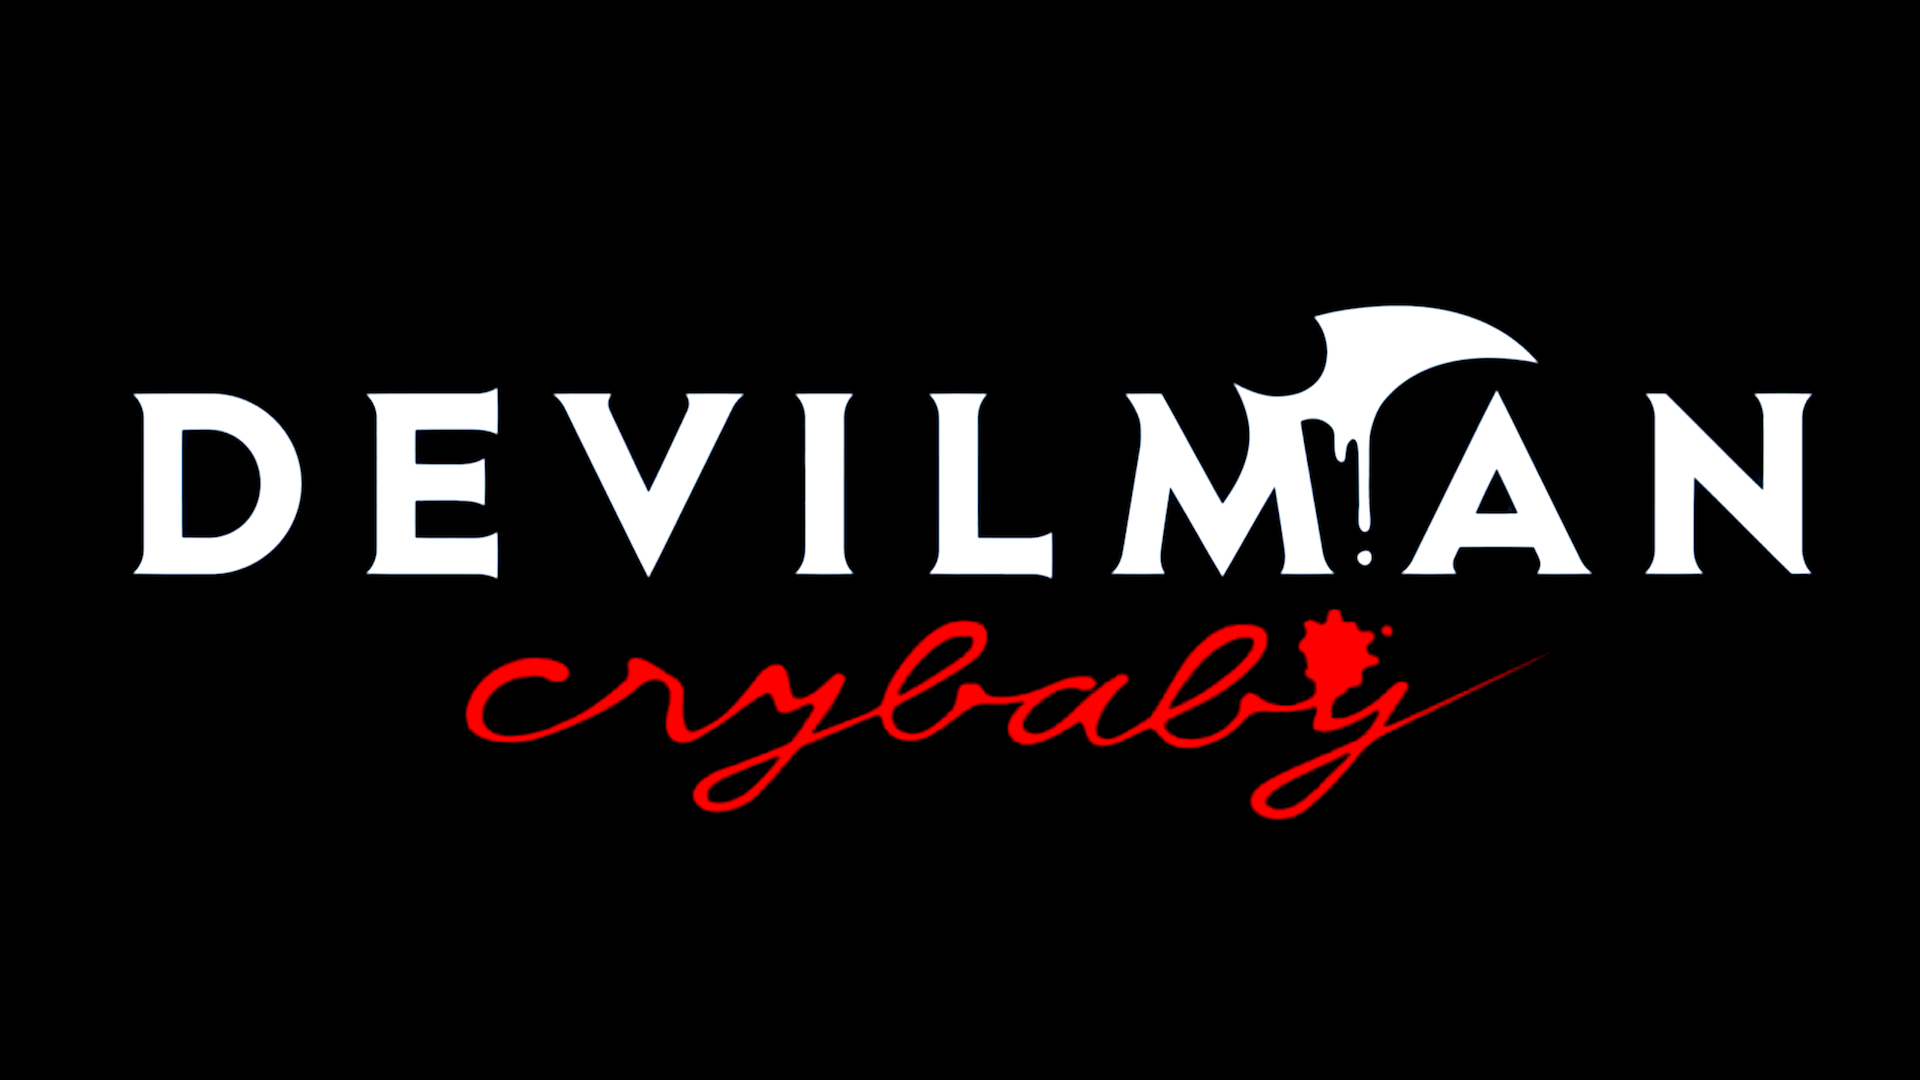 Devilman Crybaby Title Card , HD Wallpaper & Backgrounds